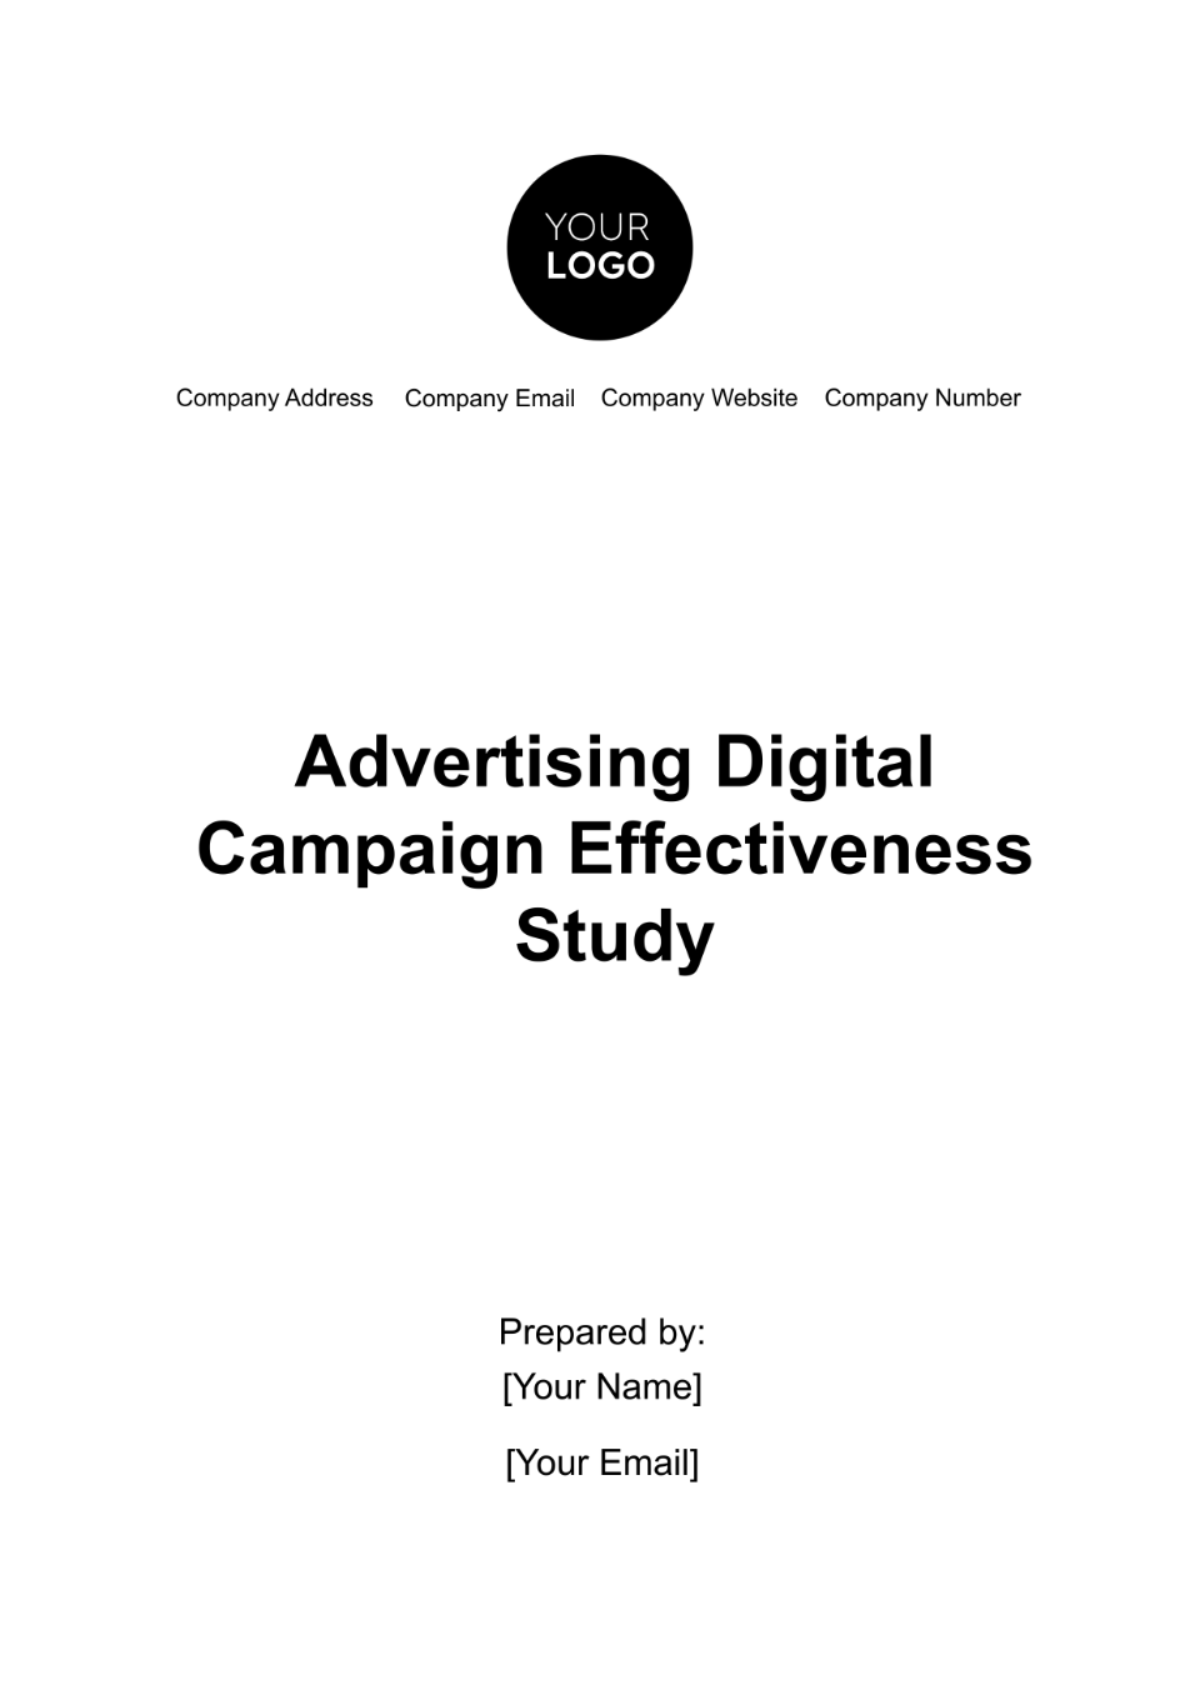 Advertising Digital Campaign Effectiveness Study Template